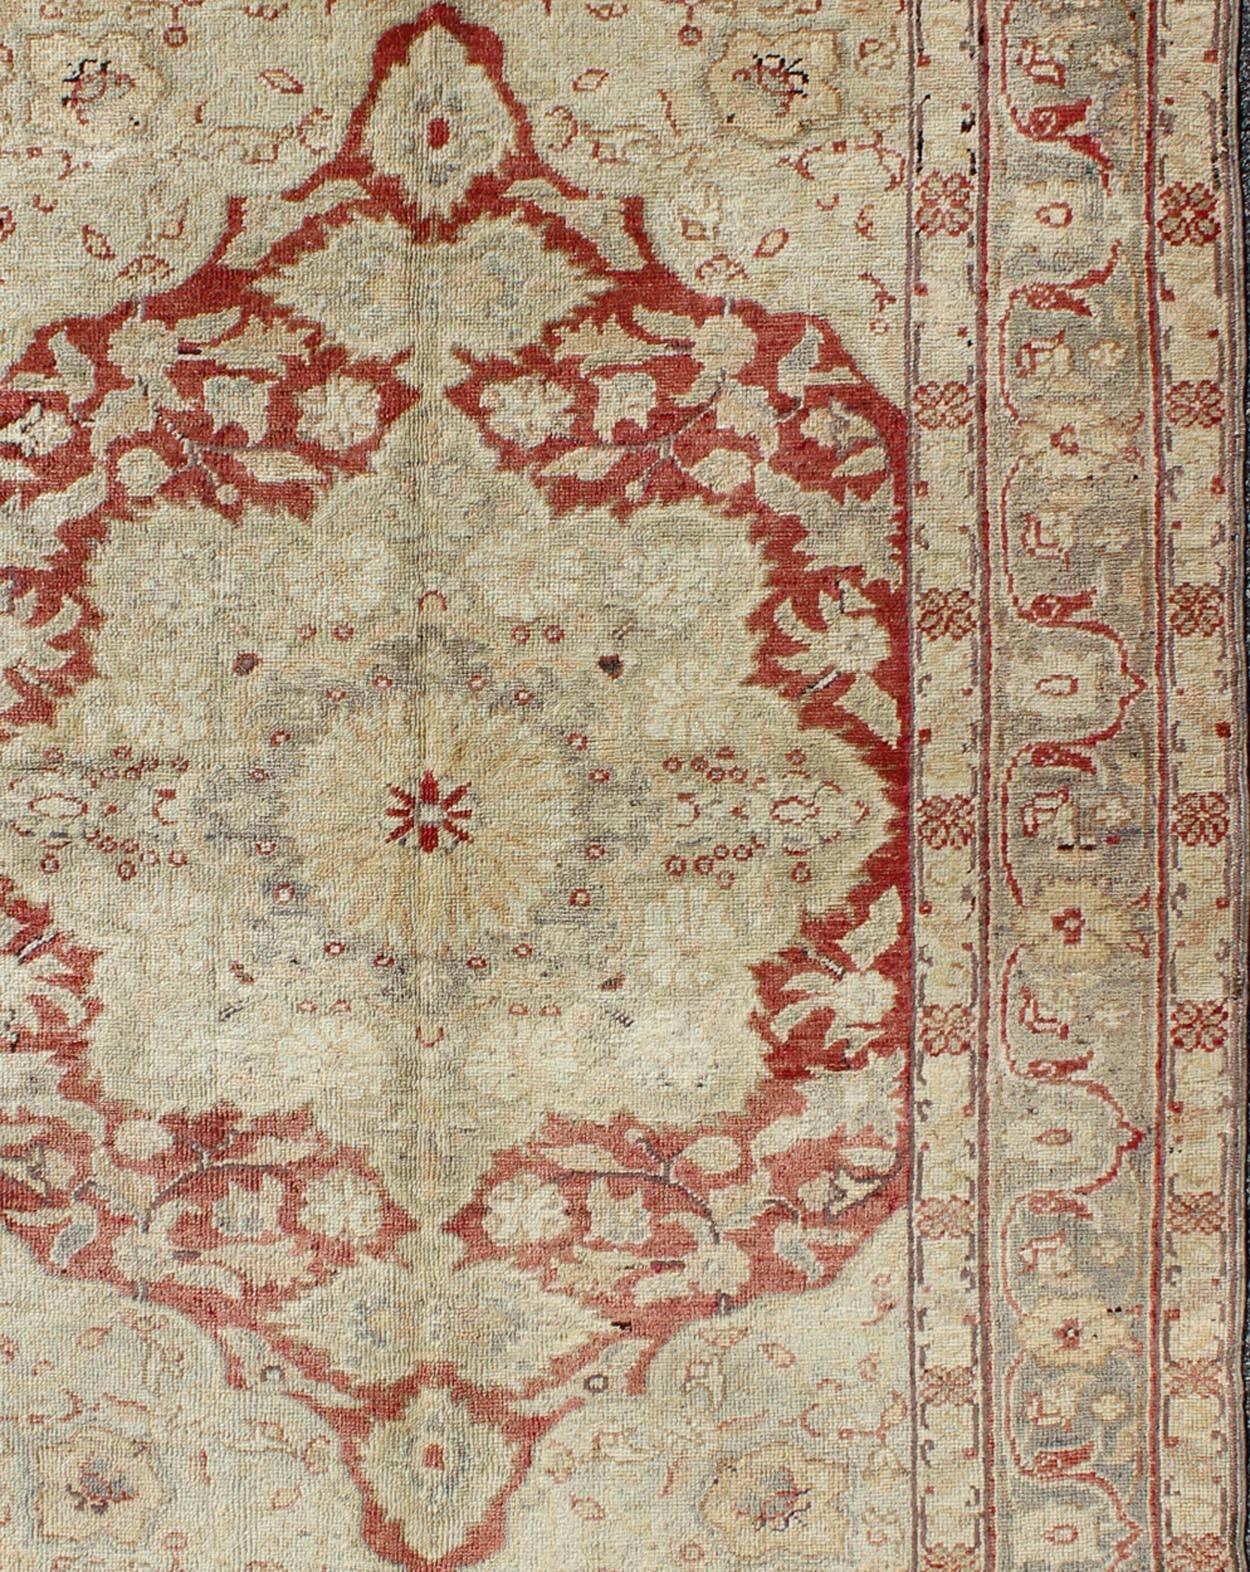 Fine Turkish Oushak Carpet with Center Medallion in Light Red and Cream In Excellent Condition For Sale In Atlanta, GA